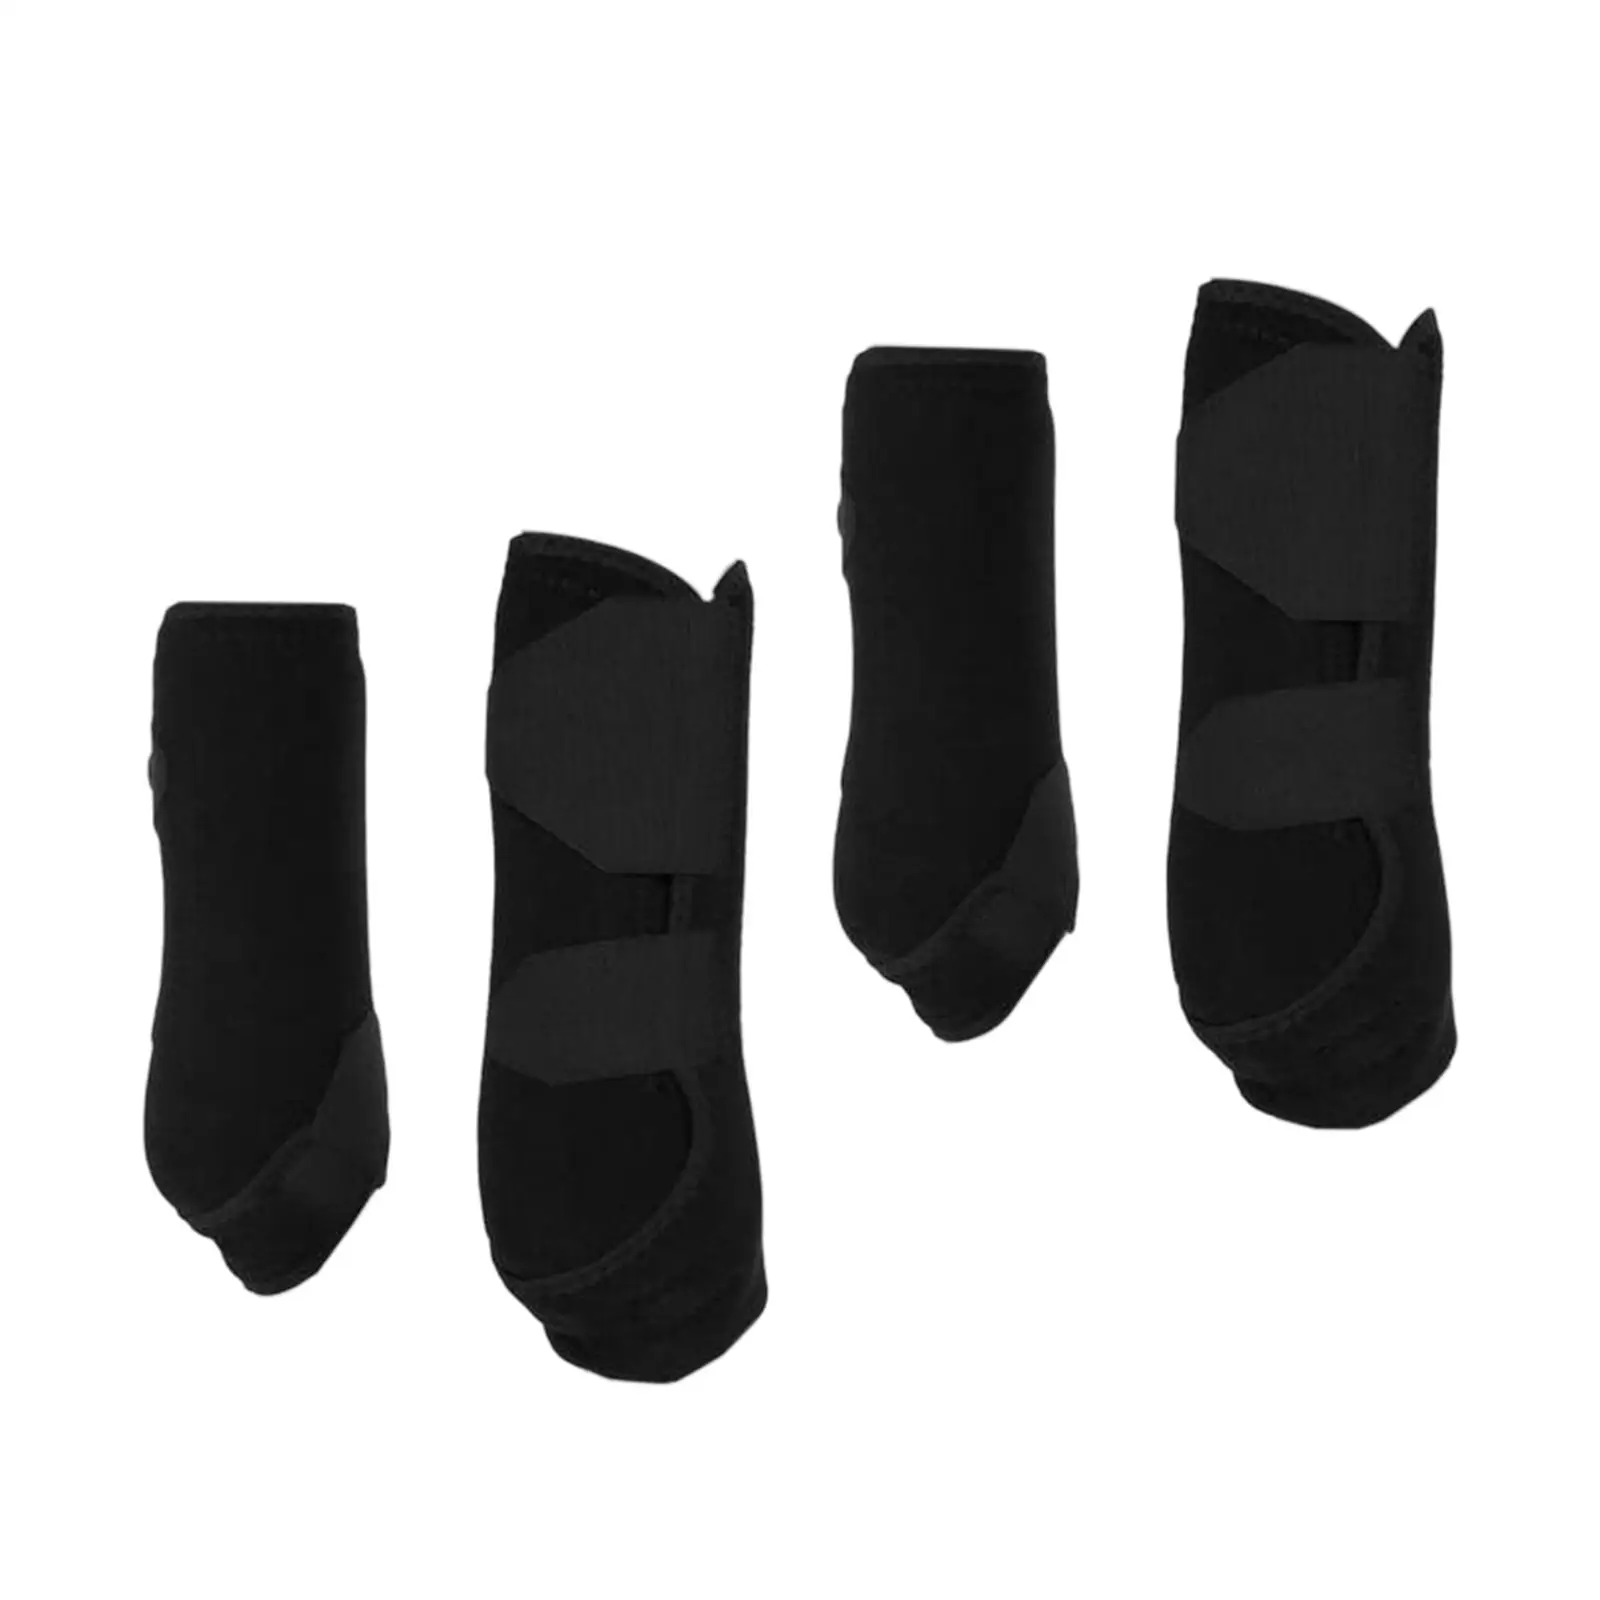 4Pcs Neoprene Horse Boots Leg Wraps Shock Absorbing Tendon Protection Guard for Jumping Riding Training Equestrian Equipment